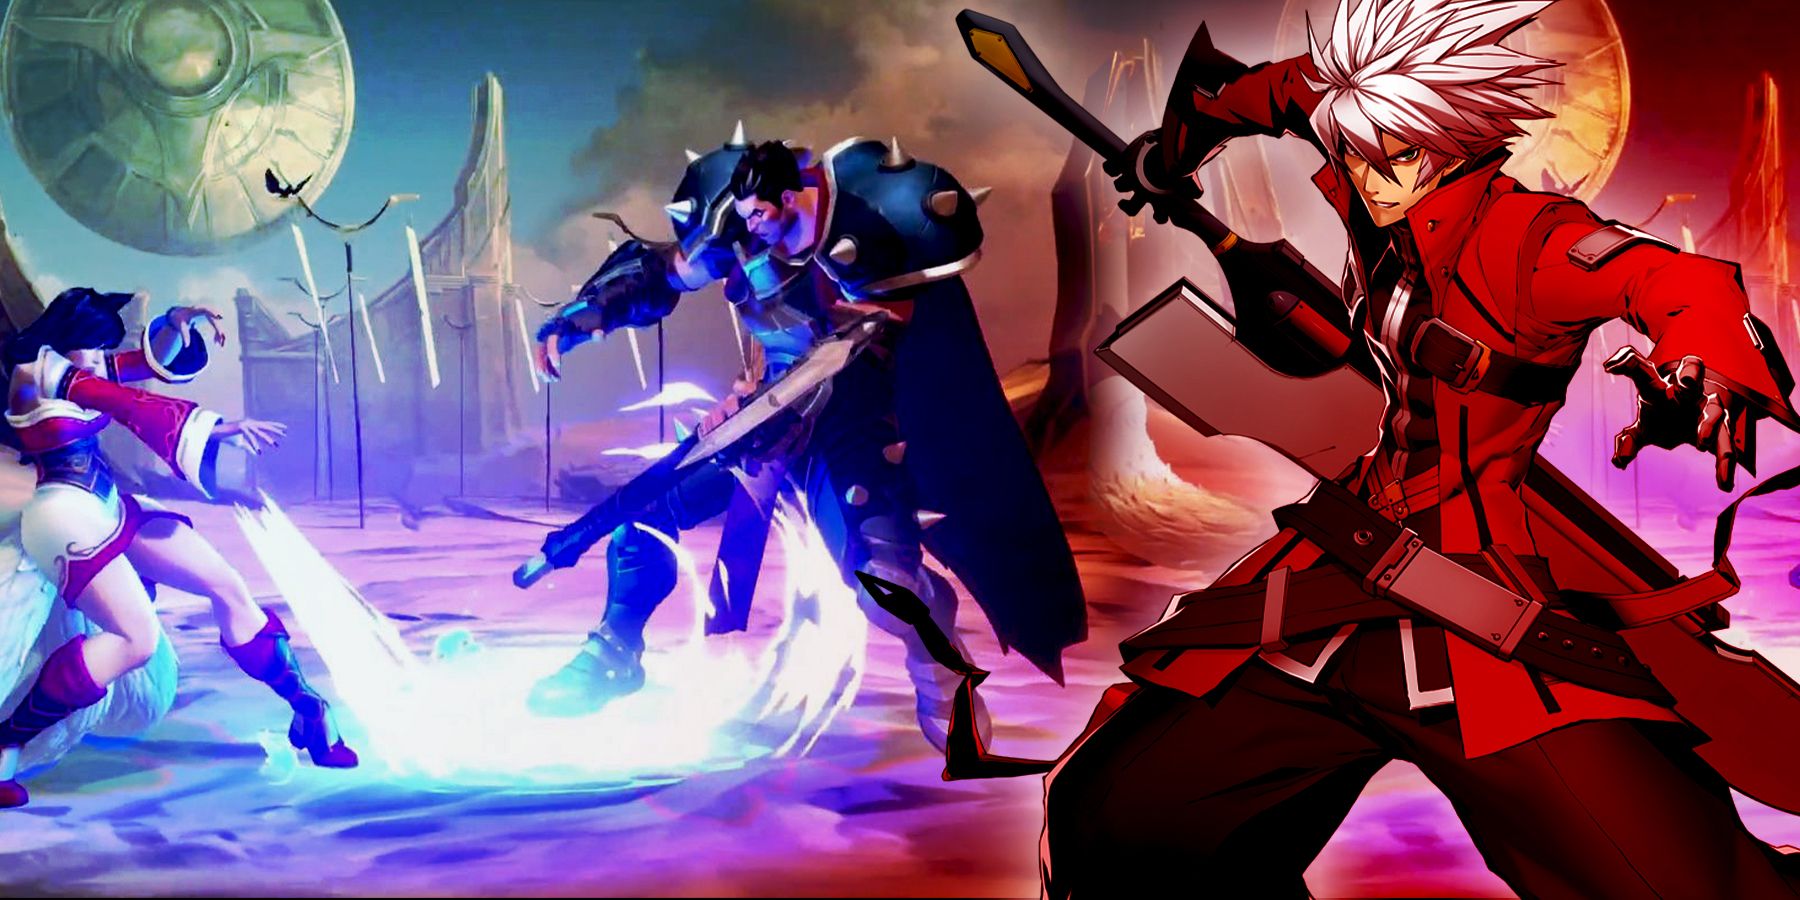 The Best Fighting Games for League of Legends Fans Waiting for Project L